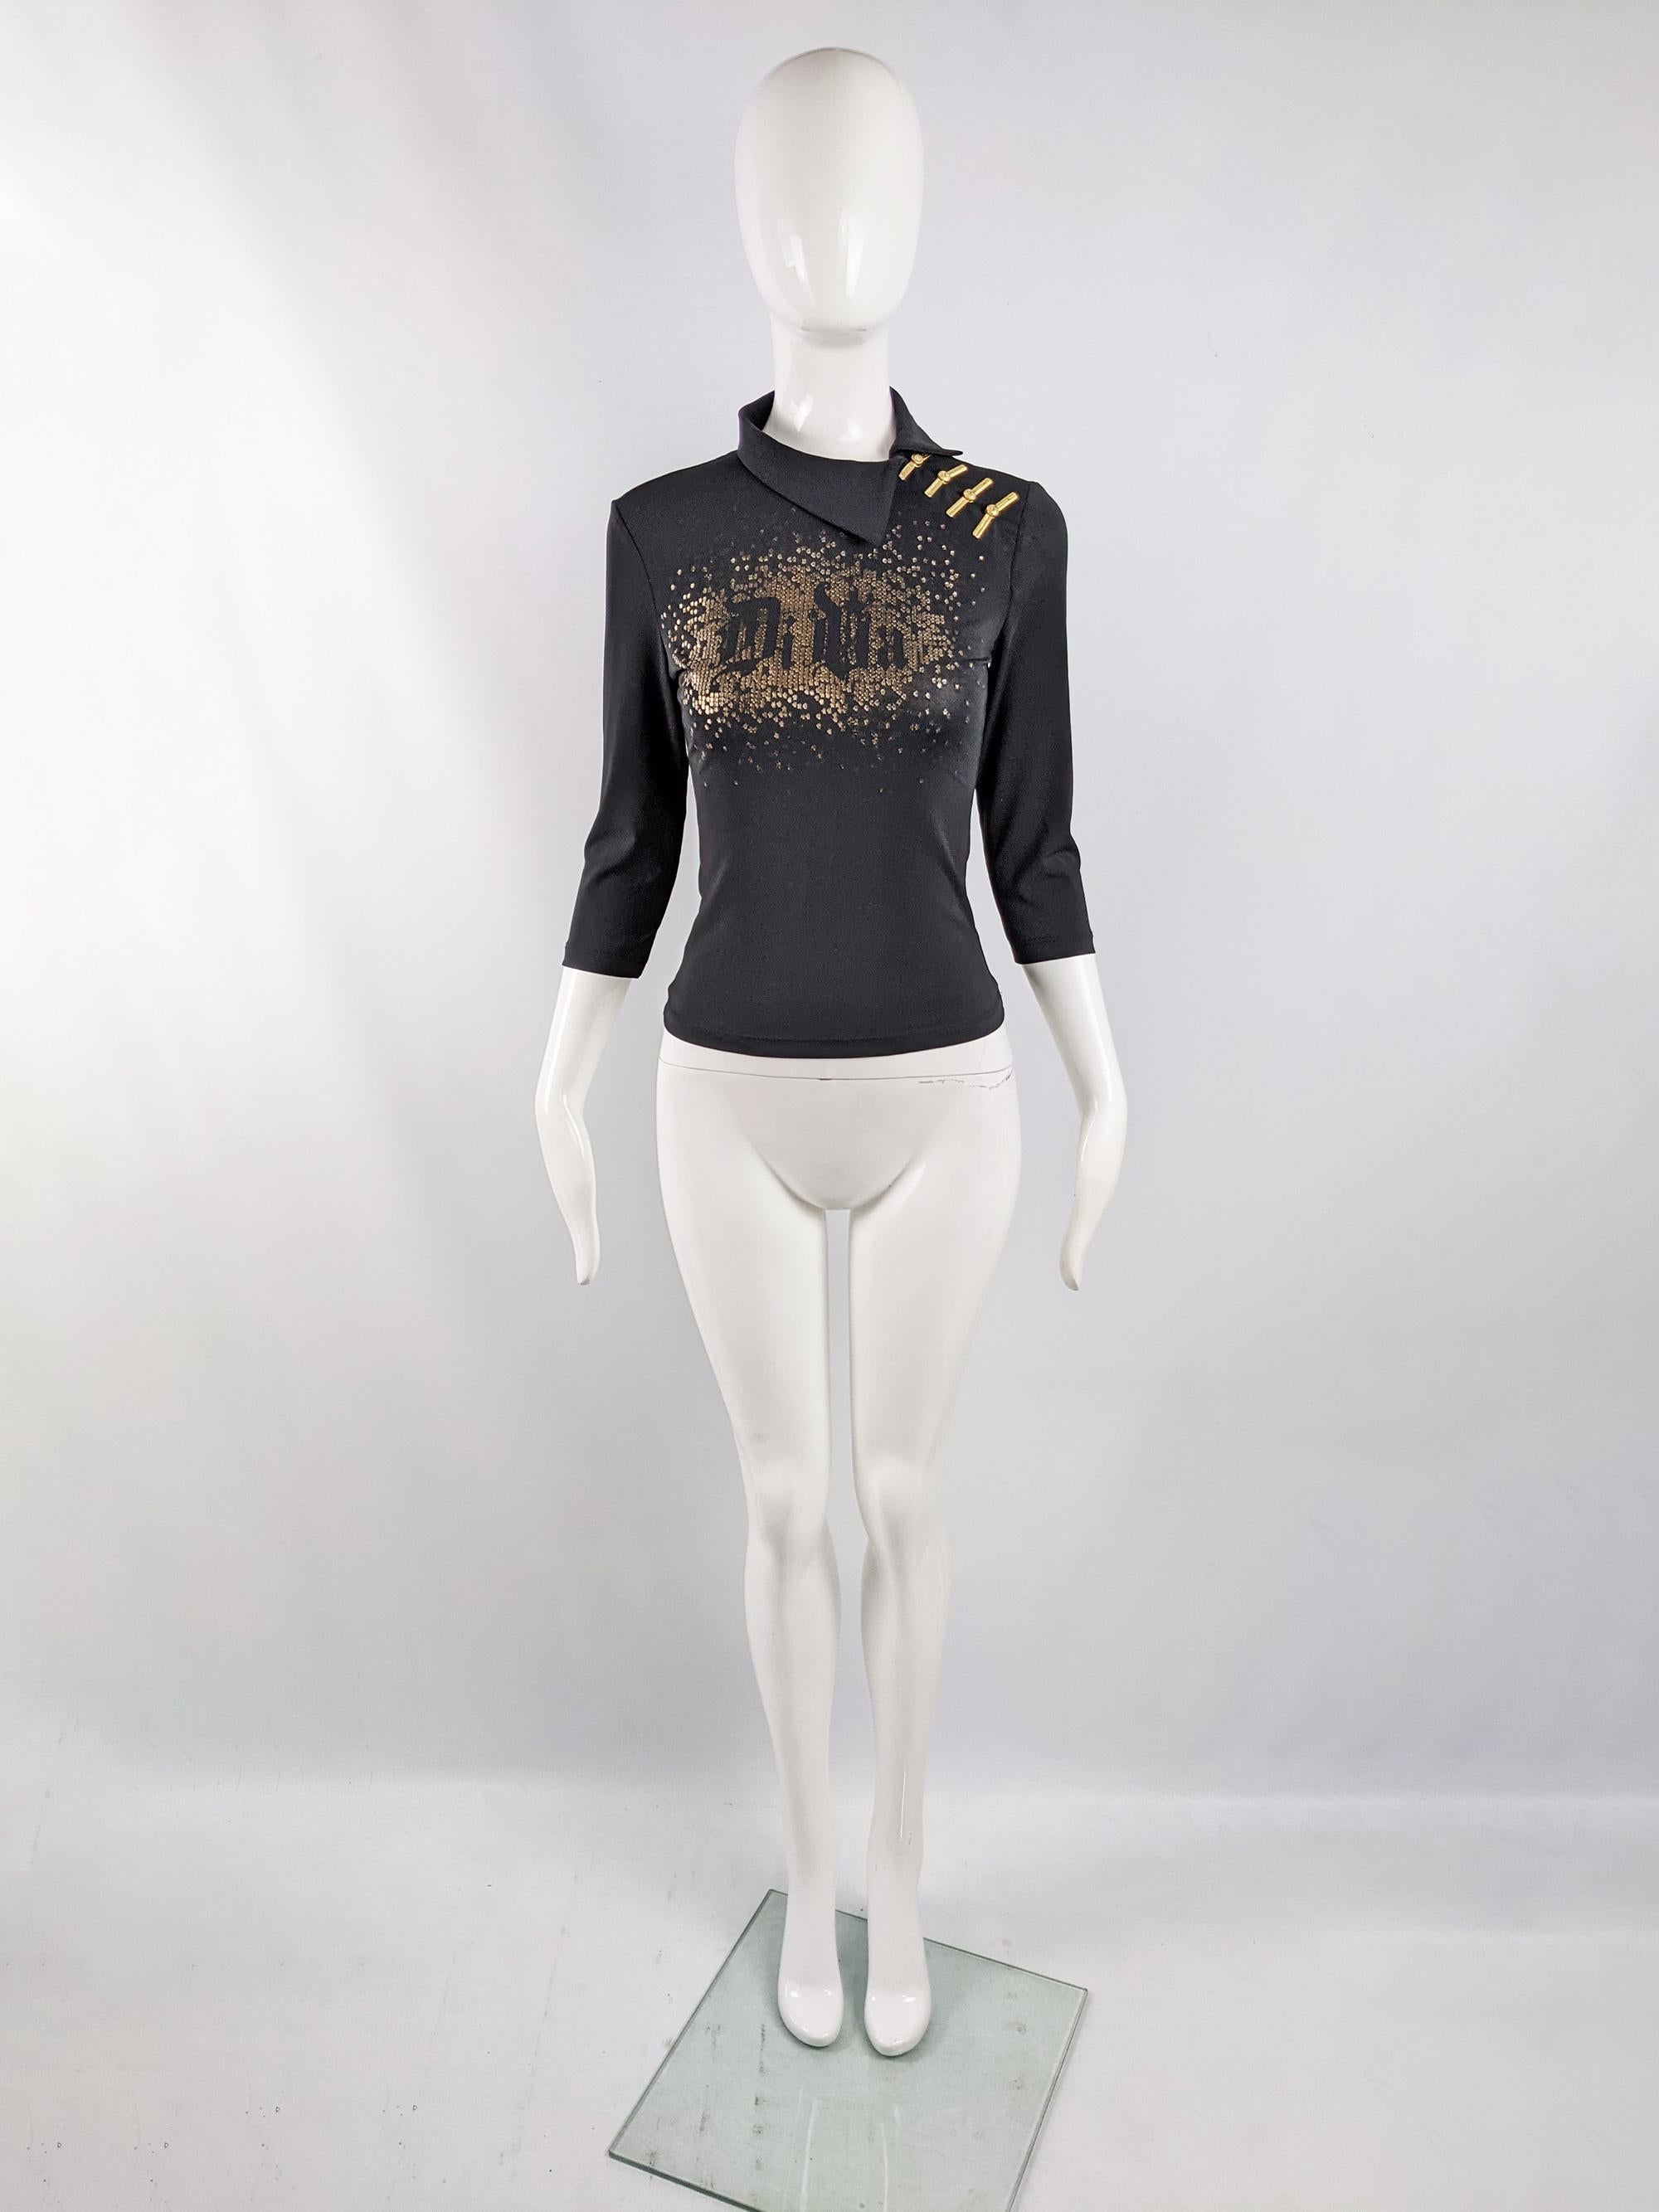 An incredible vintage Versace Jeans Couture womens top from the late 90s / early 2000s. Made in Italy, from a black jersey with half sleeves, asymmetrical collar and incredible gold clips on the shoulder giving an Asian inspired feel. The front is